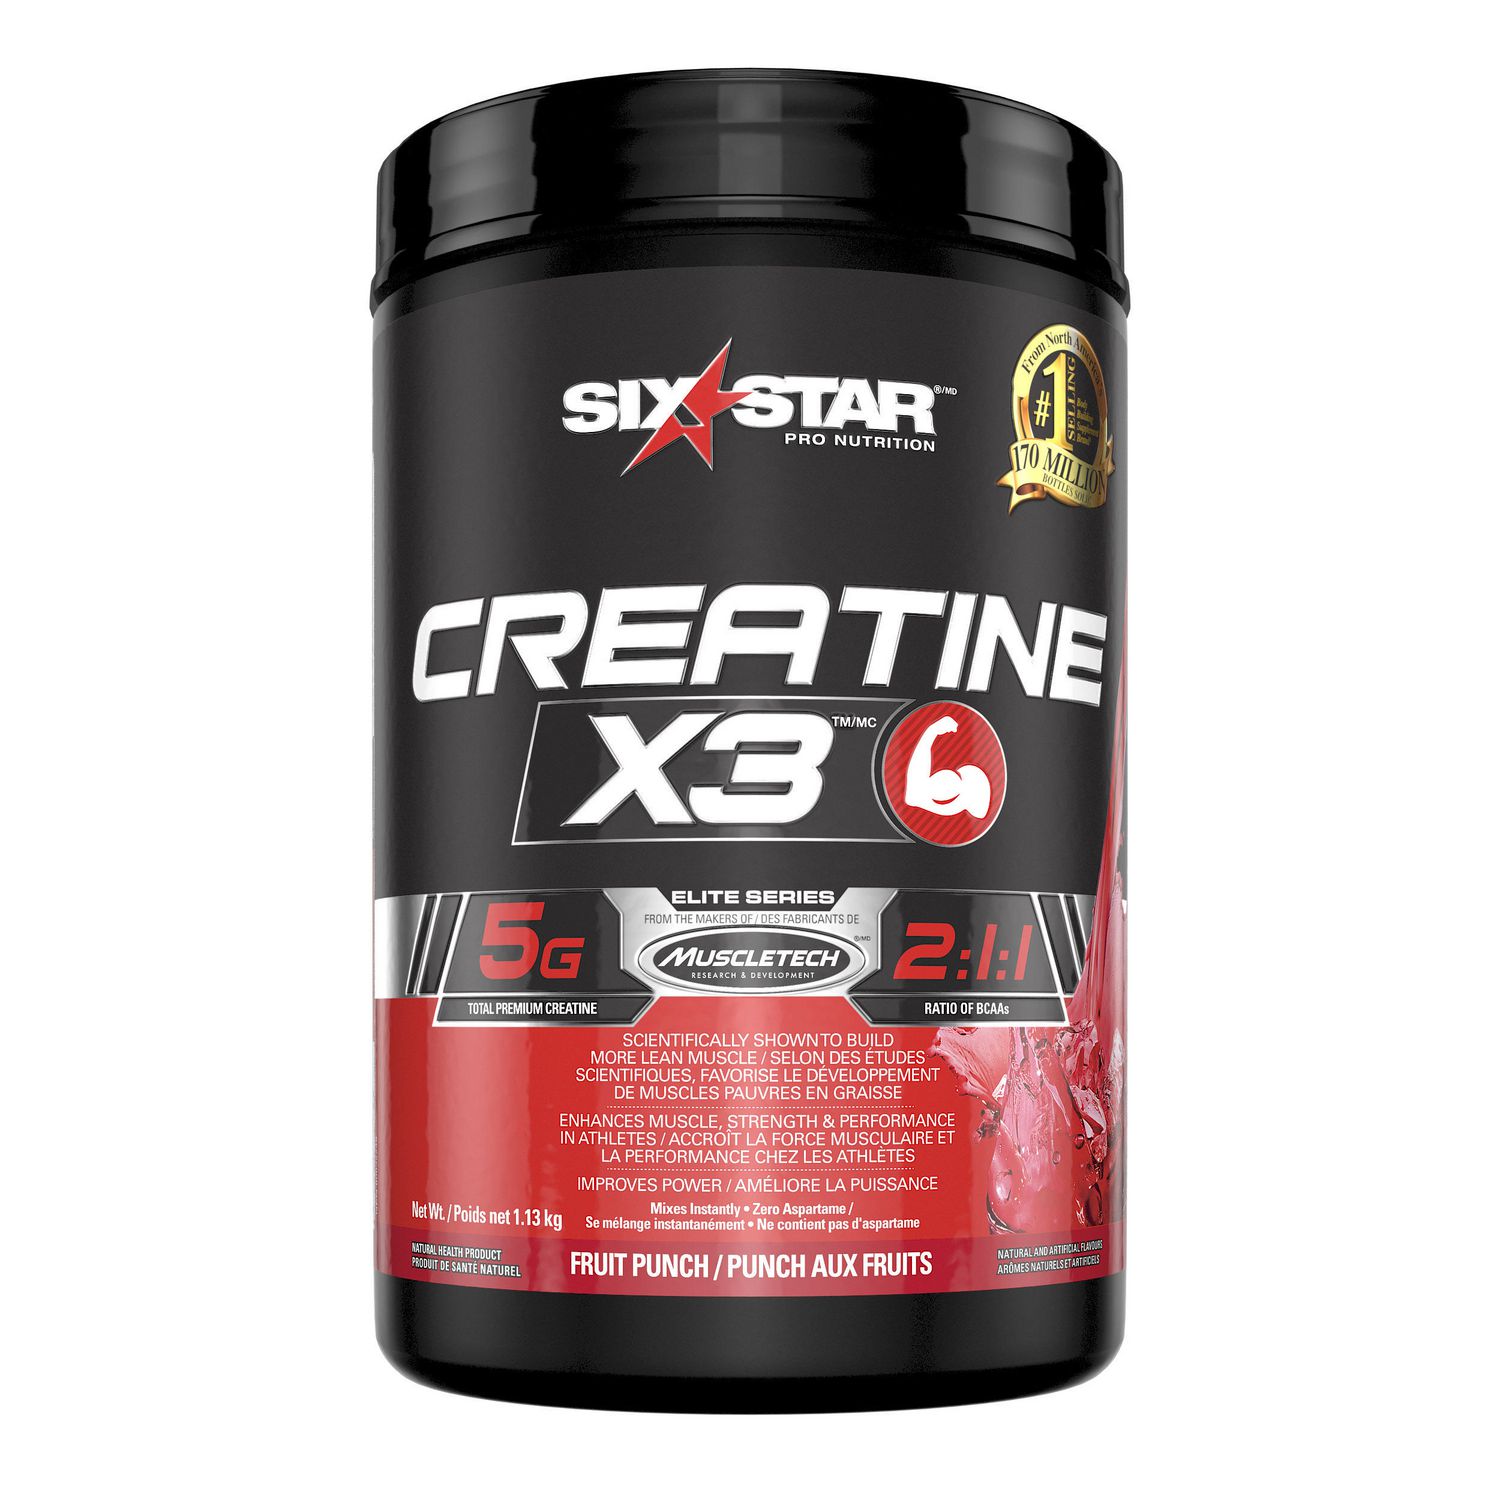 Six Star Creatine X3 Powder, Creatine plus BCAA, Creatine Monohydrate and  Creatine HCl, Post Workout Muscle Recovery and Muscle Builder for Men and  Women, Creatine Supplements, Fruit Punch (35 Servings), Muscle builder